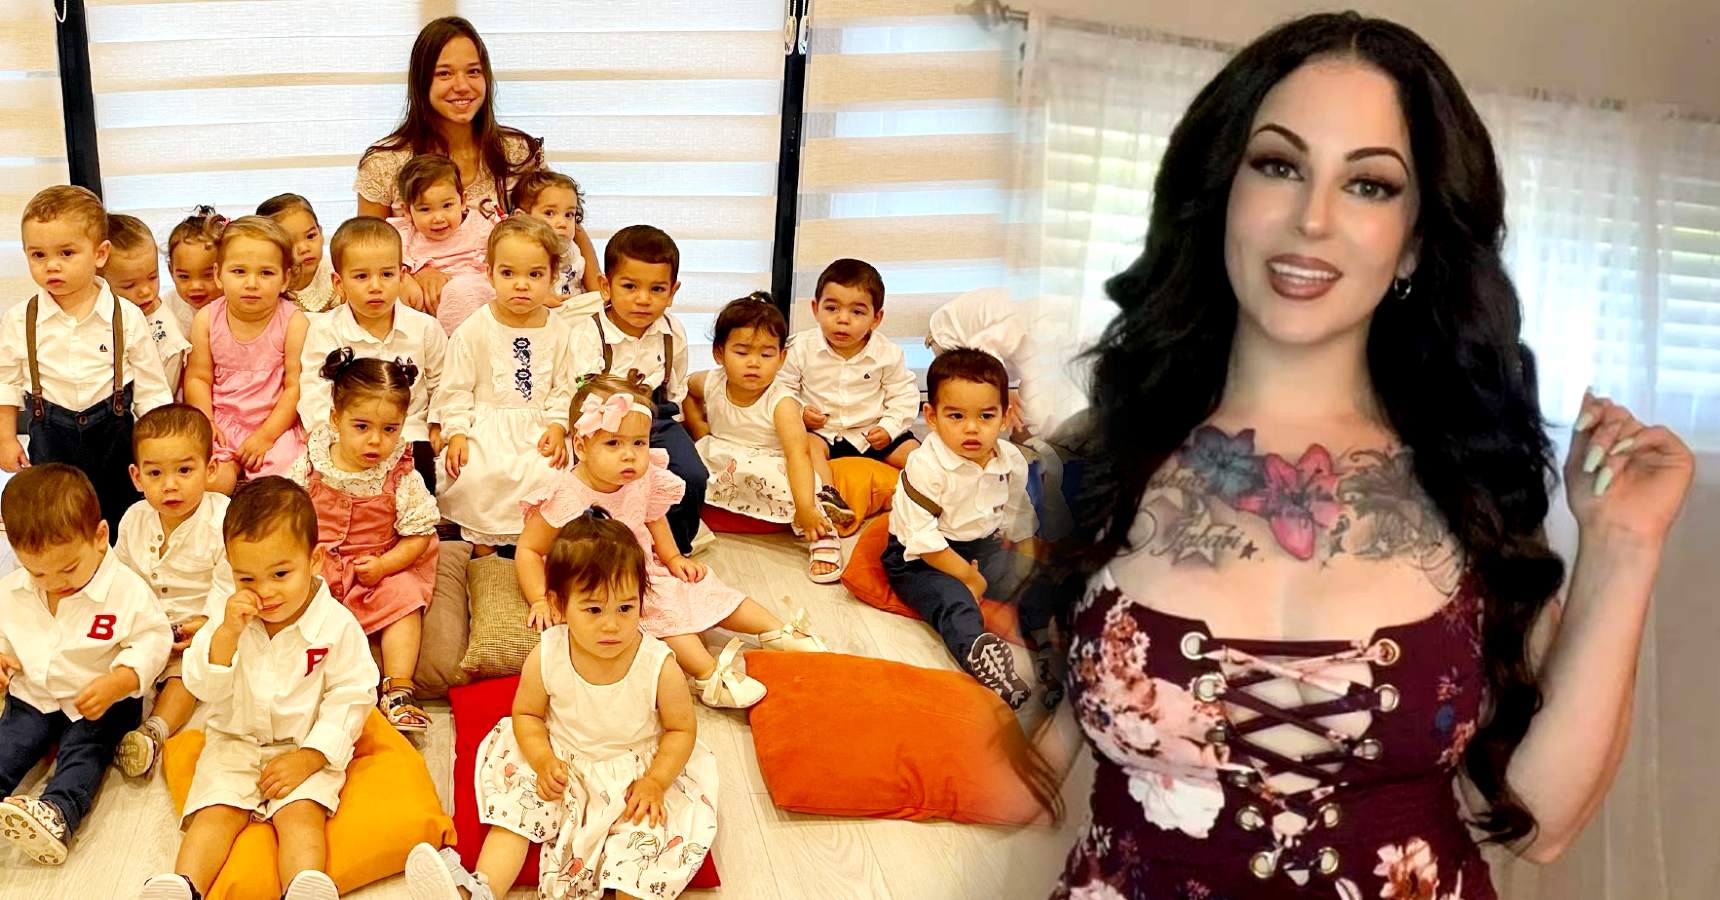 Mother of 11 child wants to became mom for 30 childs